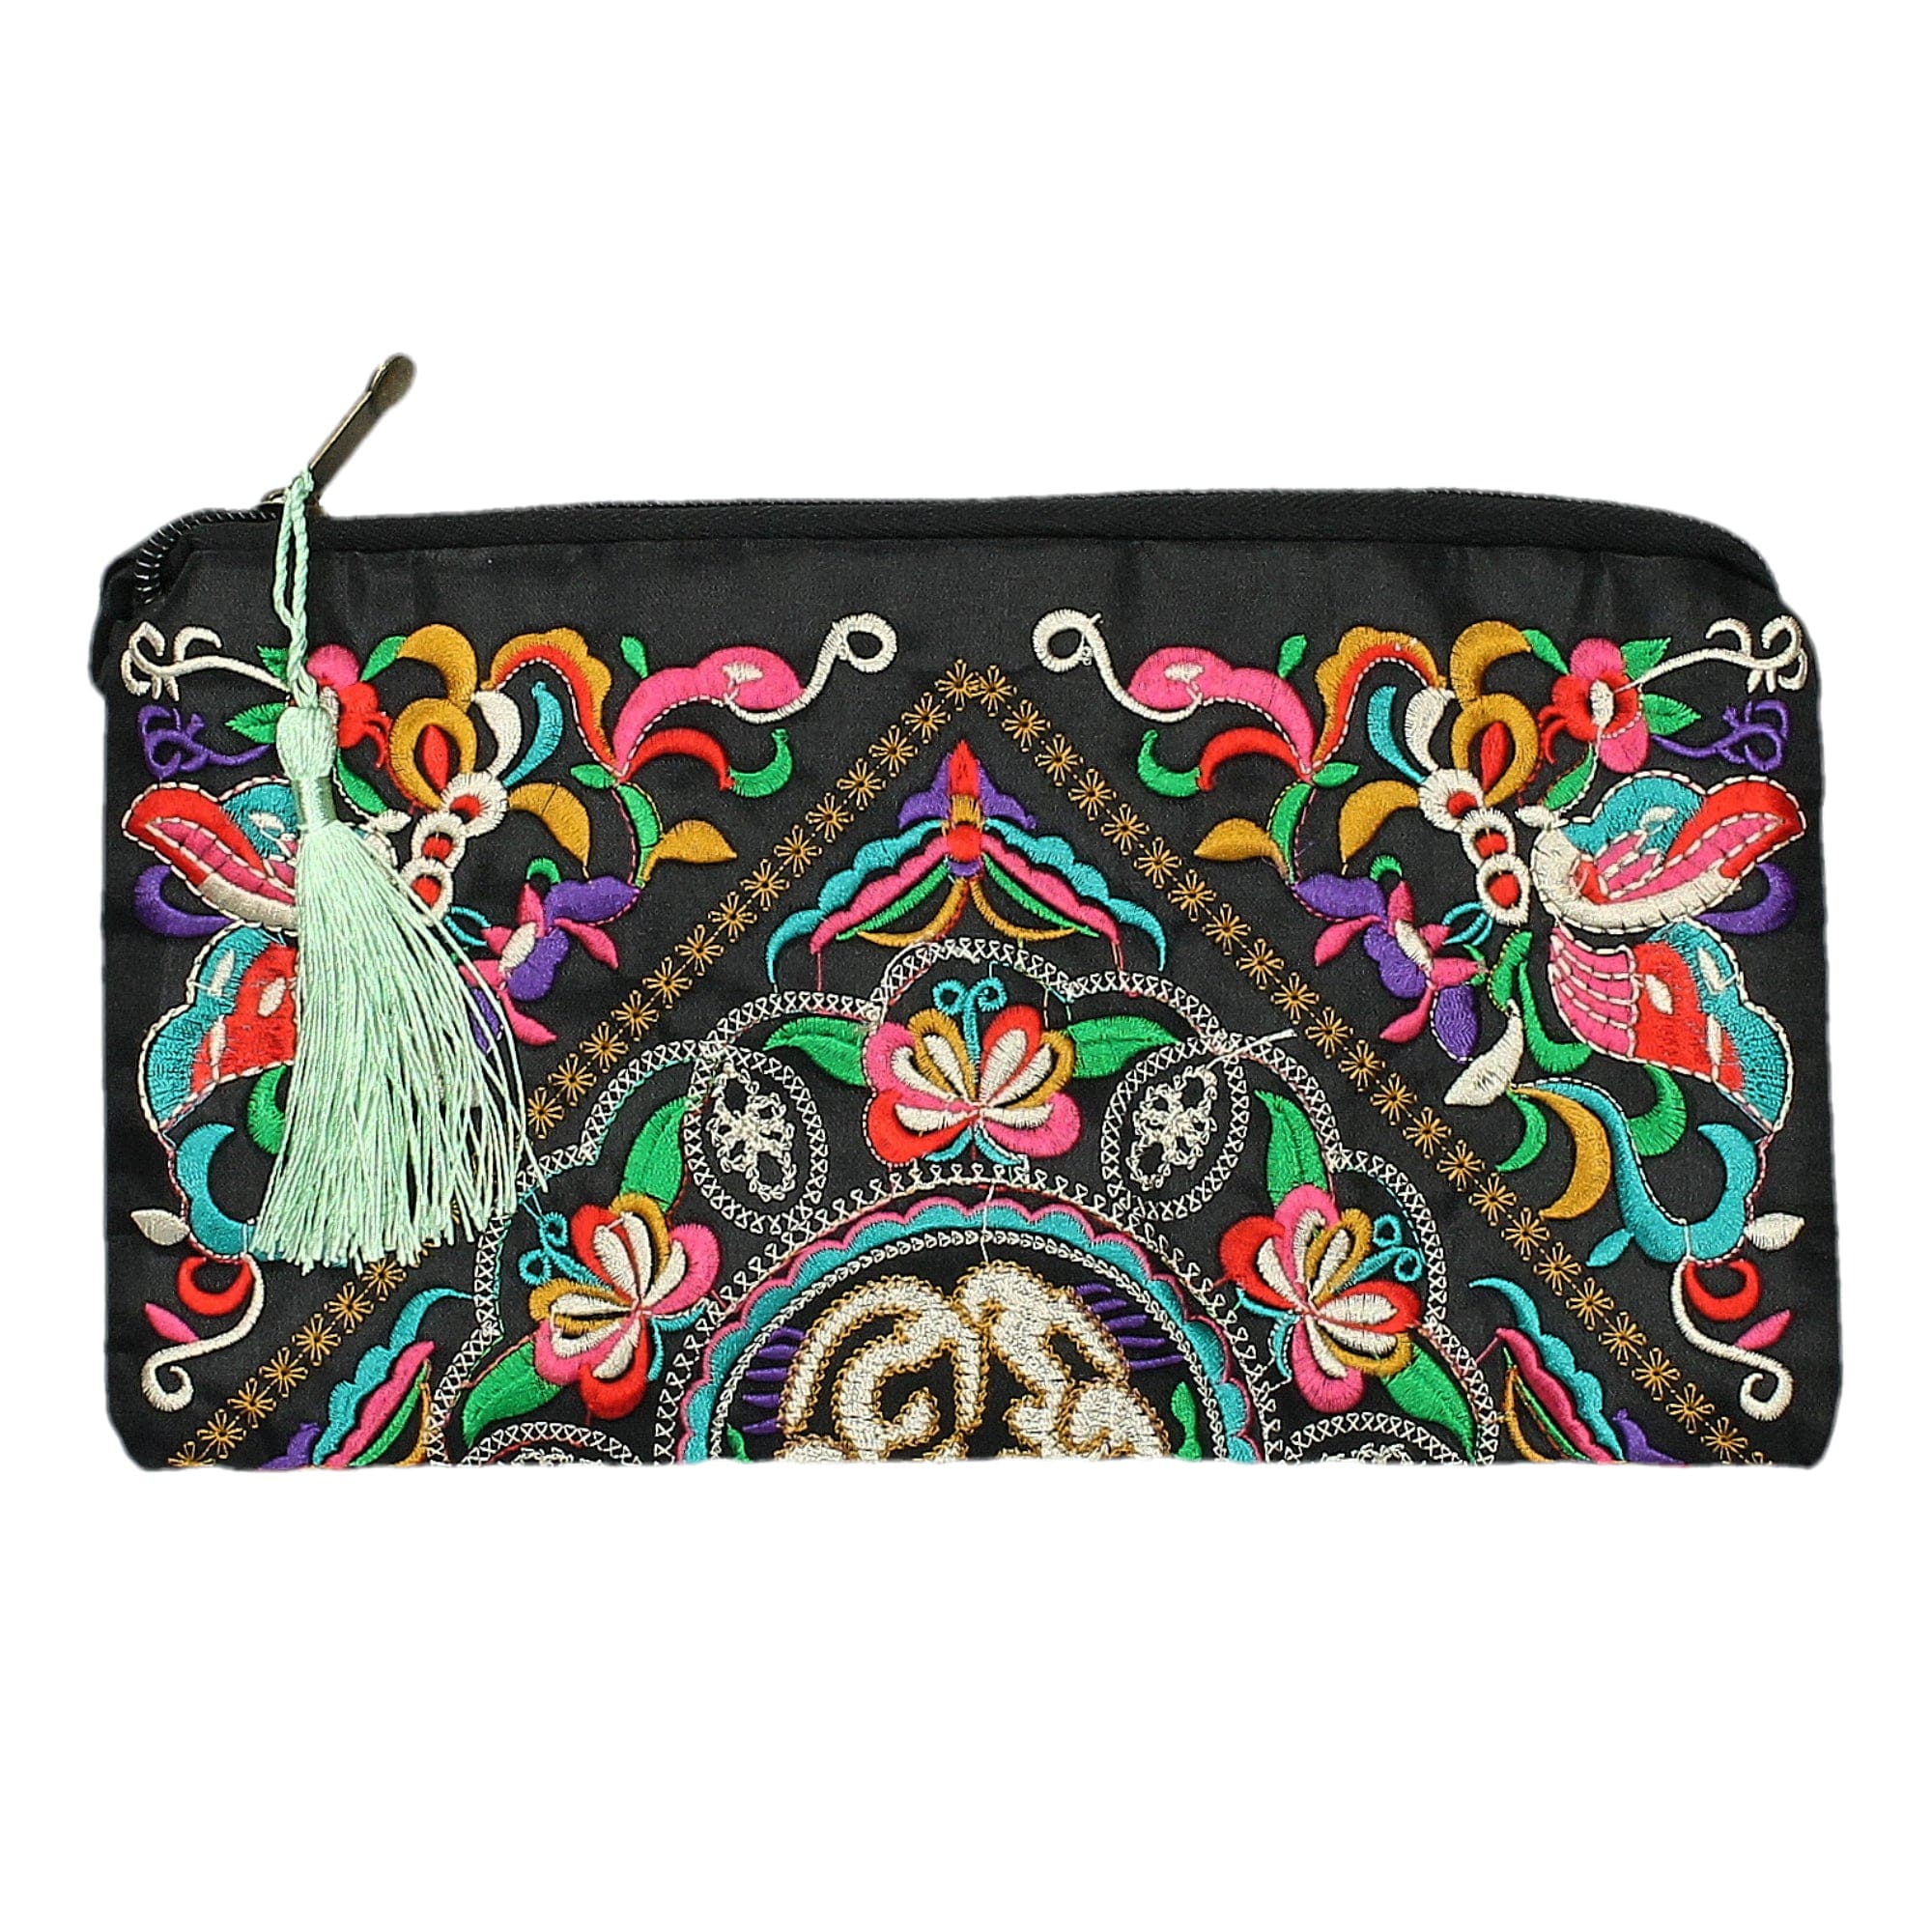 Walbert Embroidered Pouch - Anise - Bag